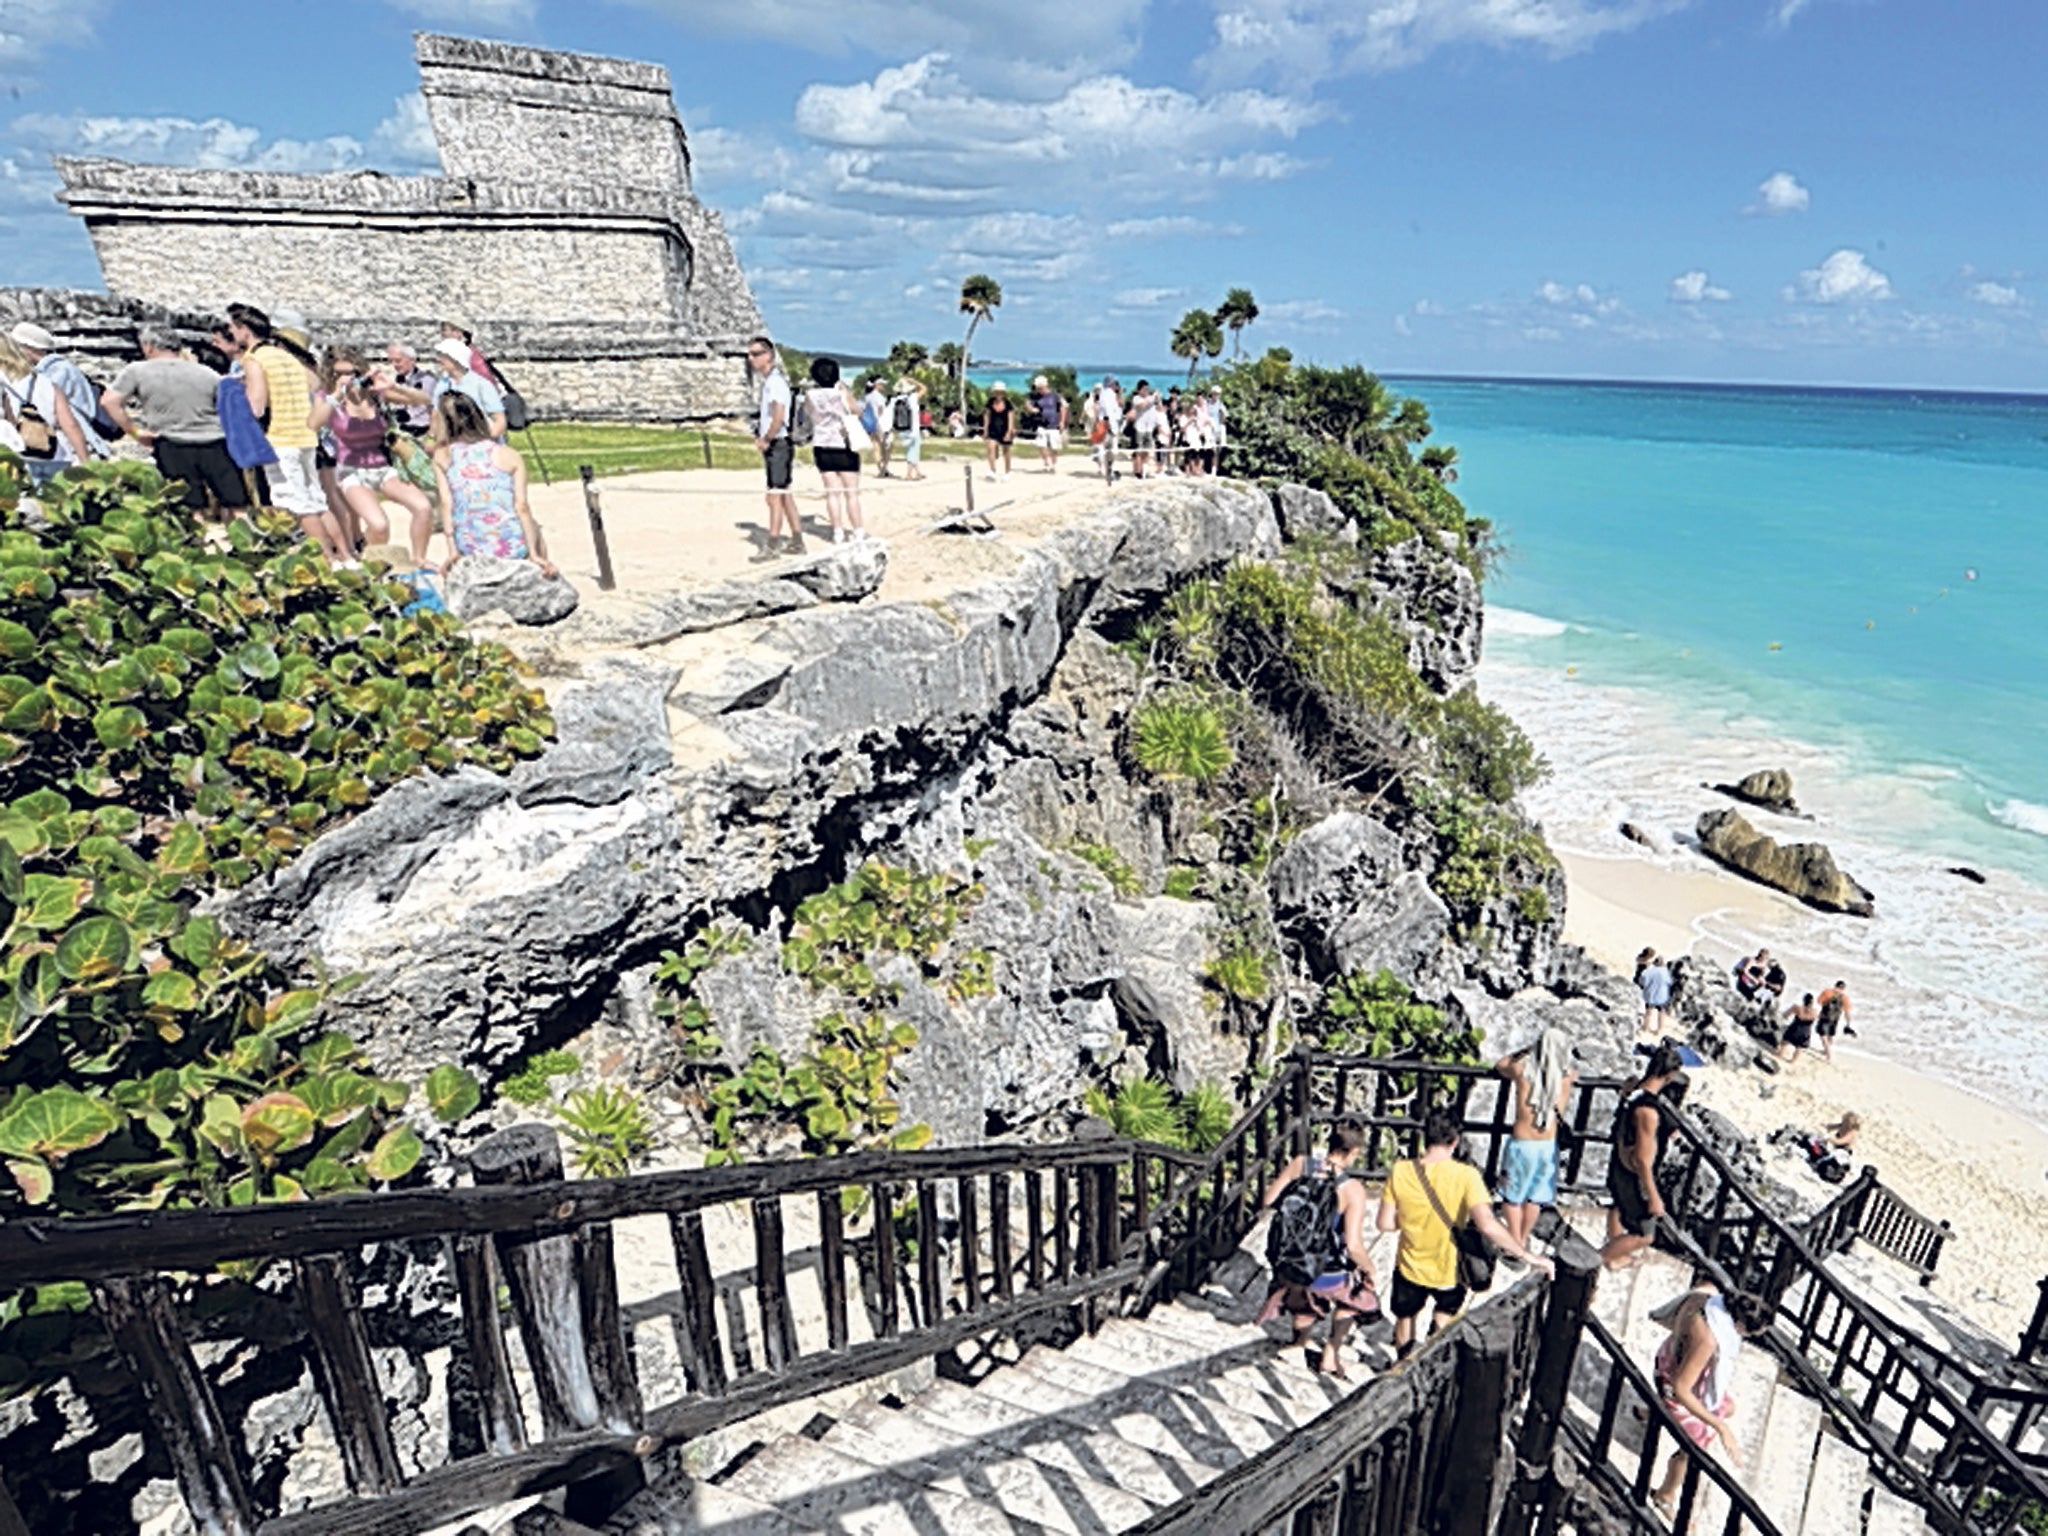 Cliff note: Tulum's Mayan ruins above the beach